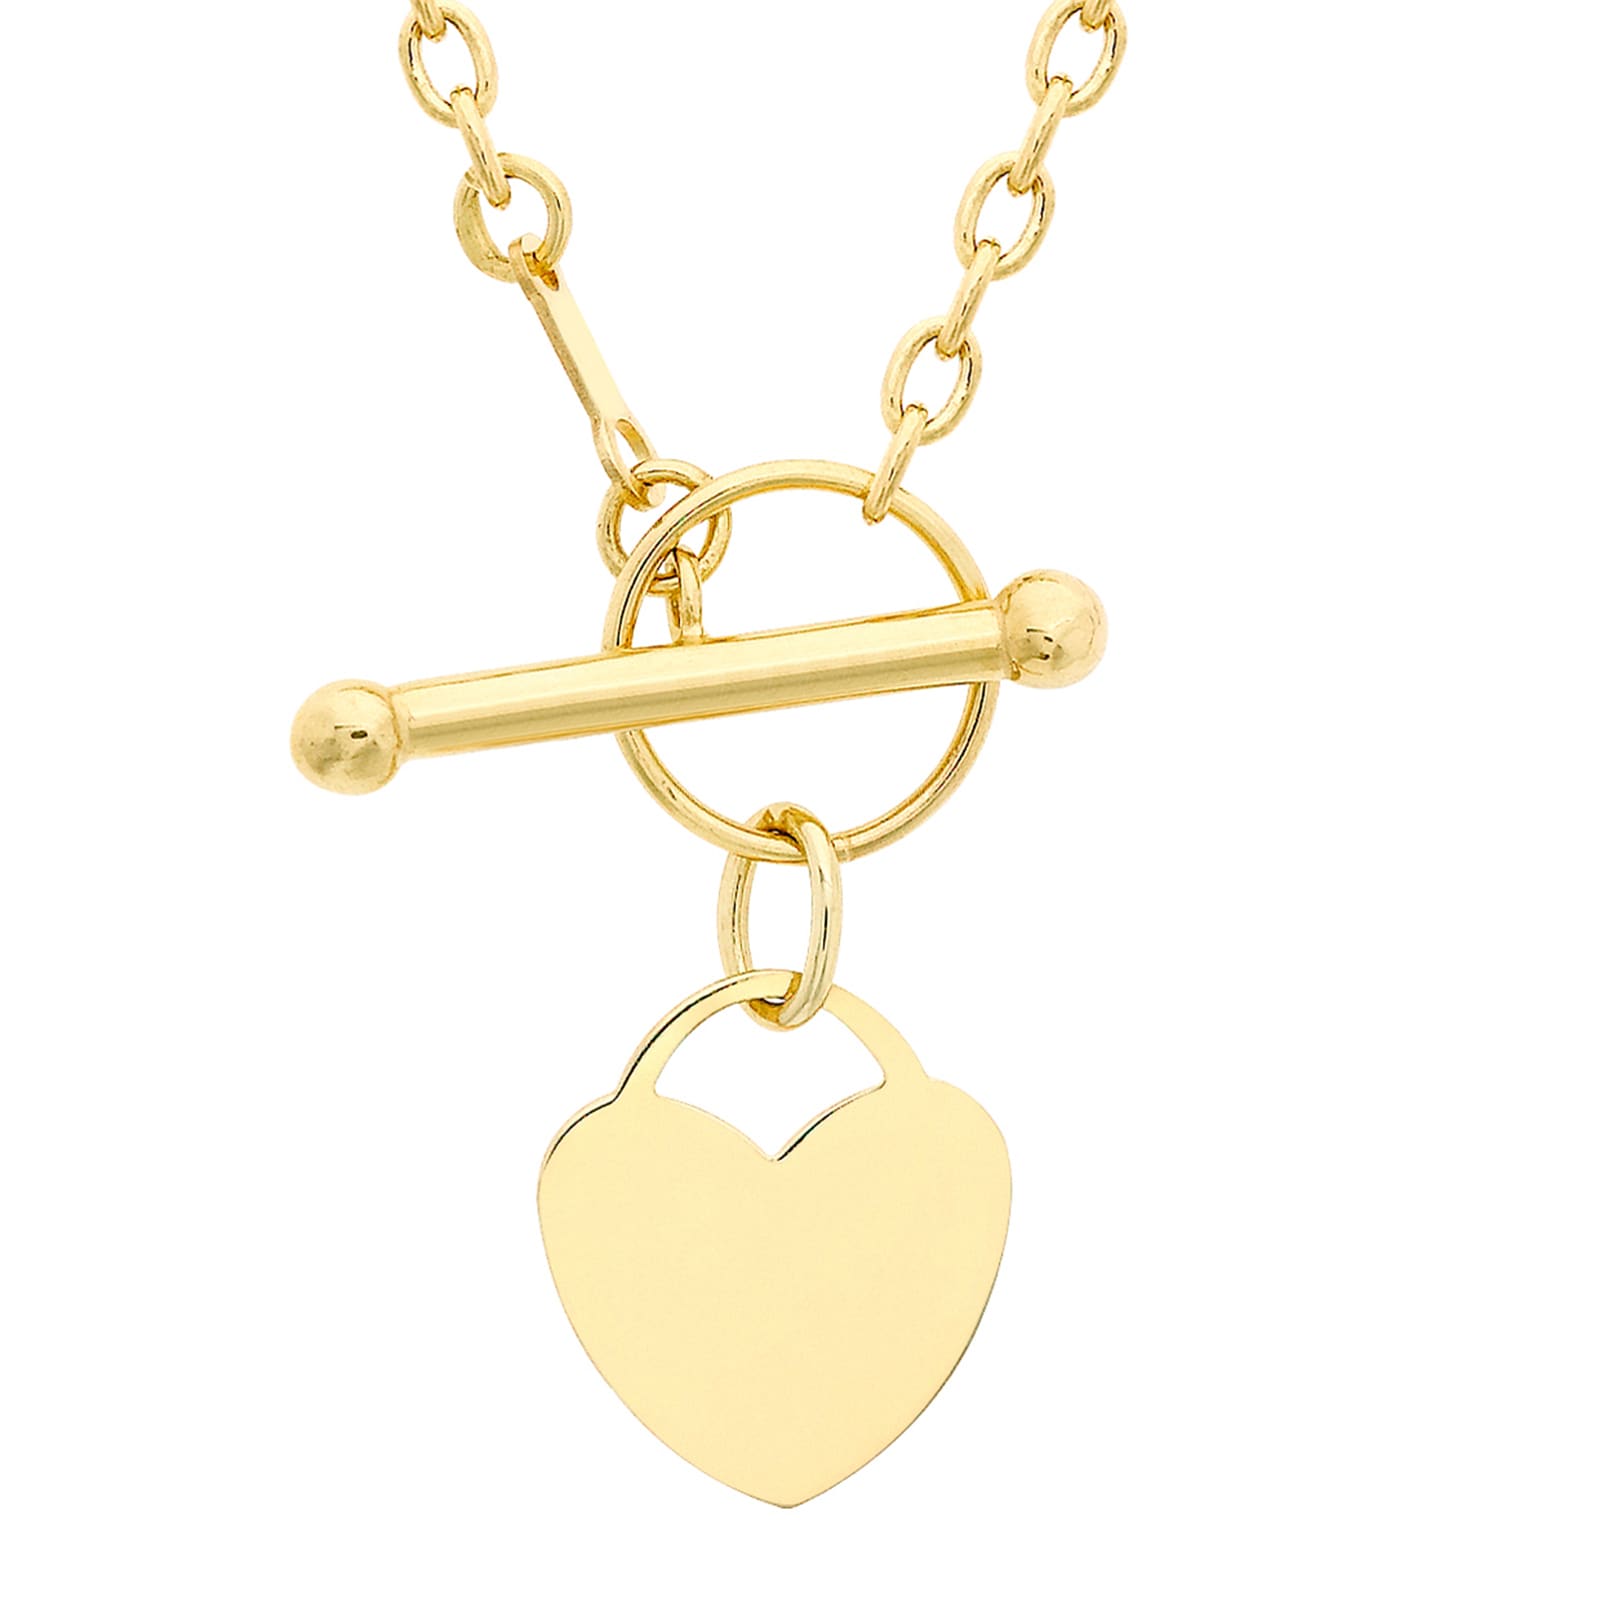 Sterling silver heart t-bar necklace - Aylesbury Bullion